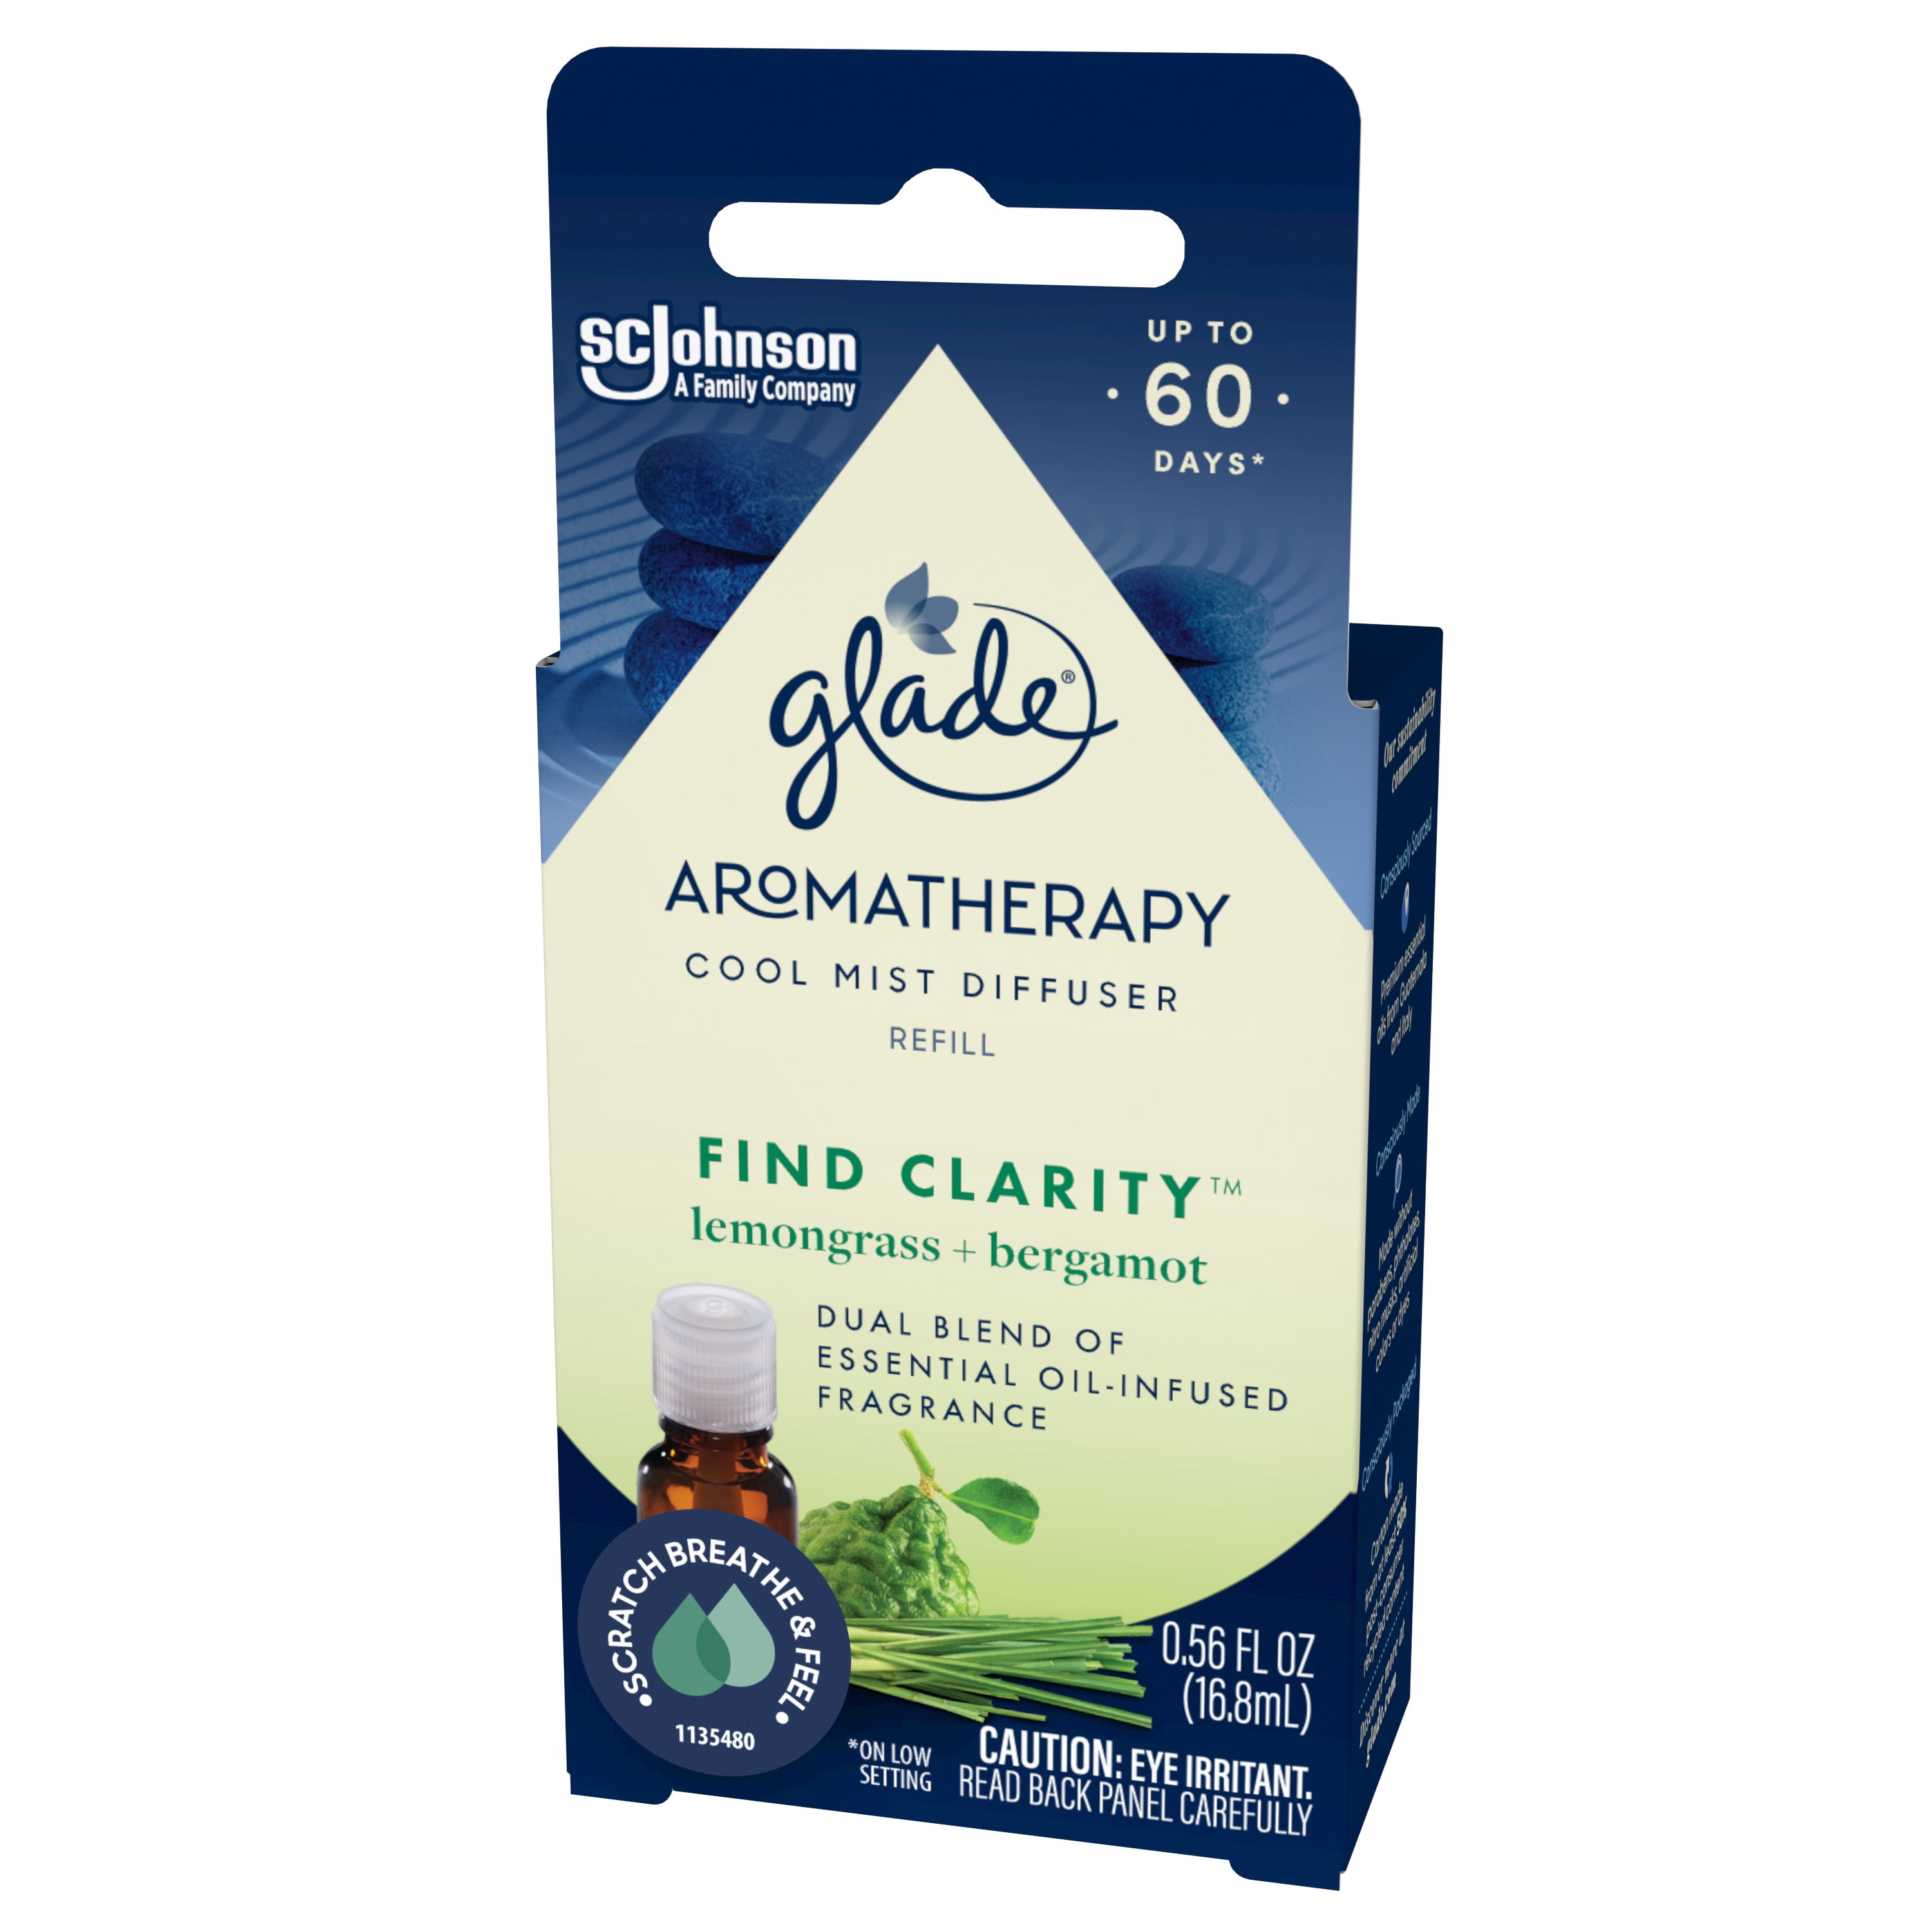 Glade Essential Oil Diffuser Refill, Find Clarity Scent with Notes of  Bergamot & Lemongrass, 0.56 oz (16.8 ml), for Use with Cool Mist  Aromatherapy Diffuser & Air Freshener for Home 